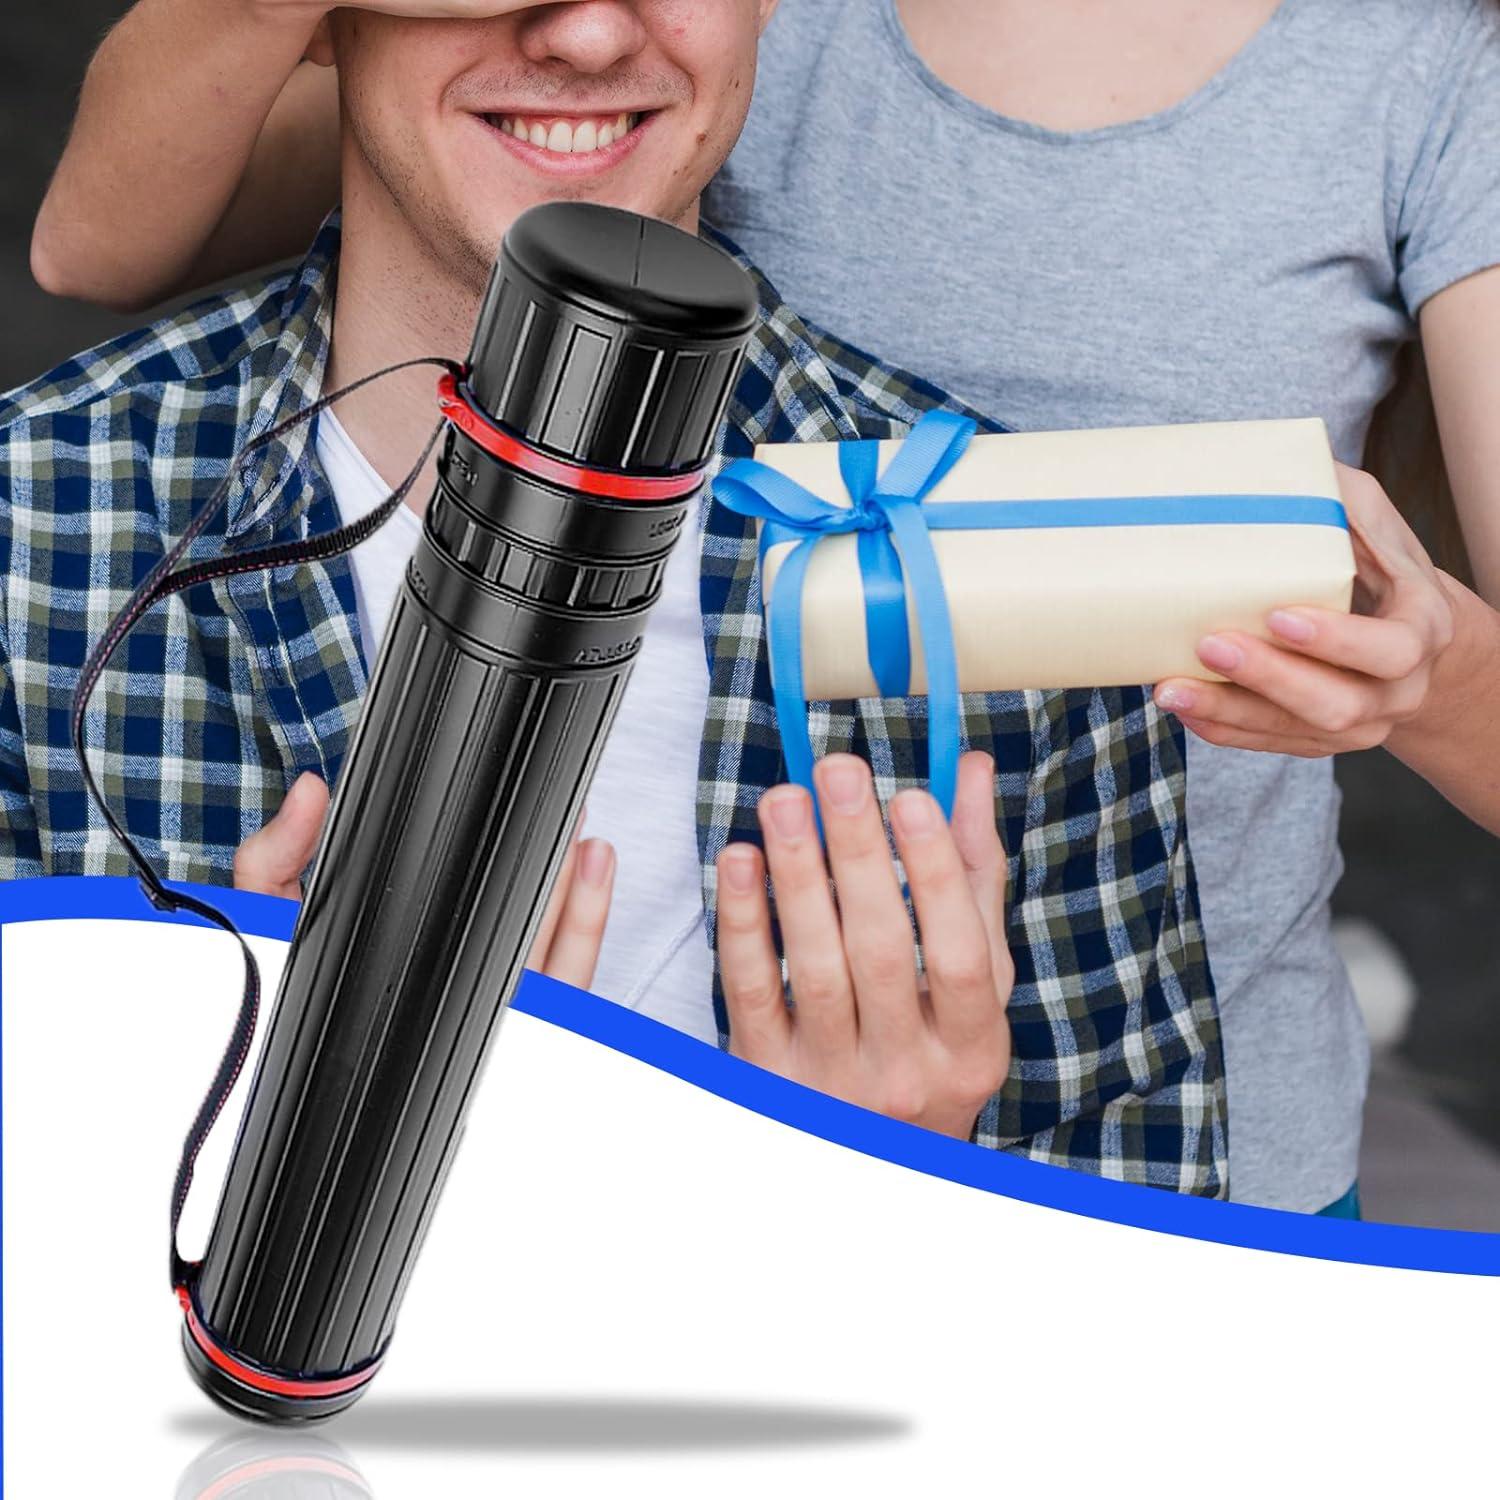 Tooyful Extendable Poster Tubes Expand from 18”to 28'' with Shoulder Strap, Carry Documents, Blueprints, Drawings and Art, Black Portable Storage